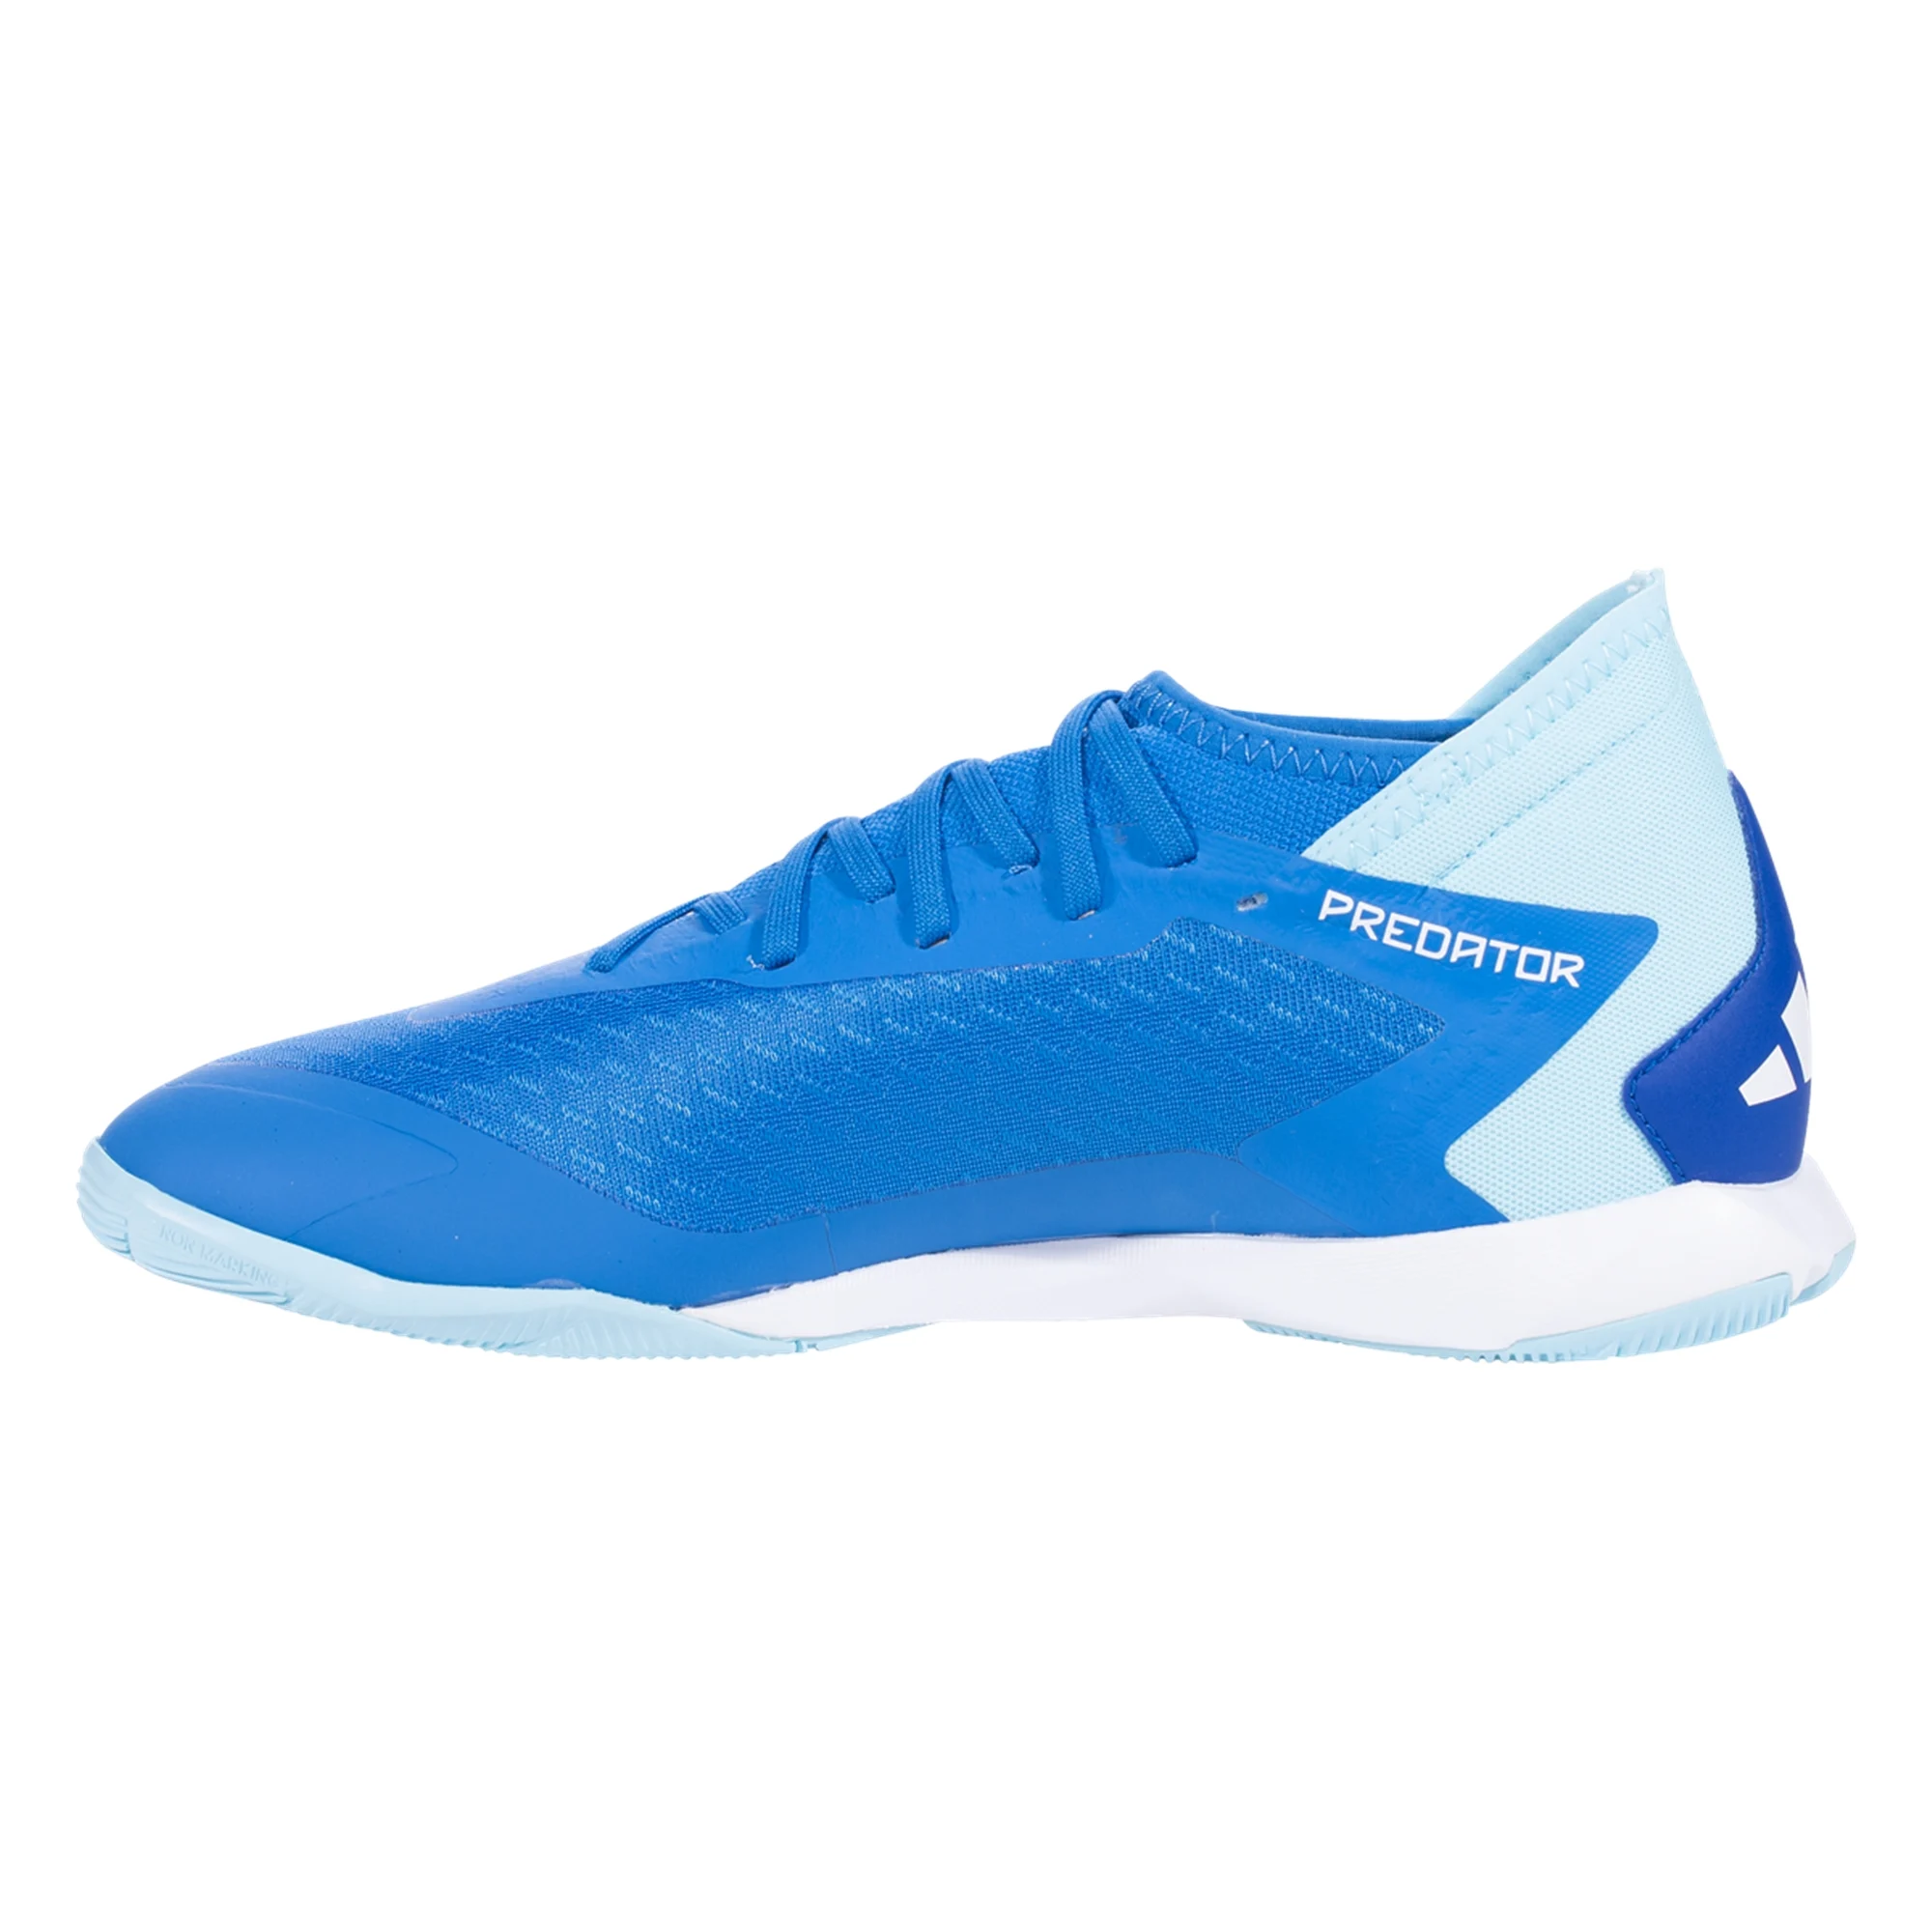 adidas Predator Accuracy.3 Indoor Soccer Soccer Shoes Blu (Bright Royal/Bliss - Wearhouse